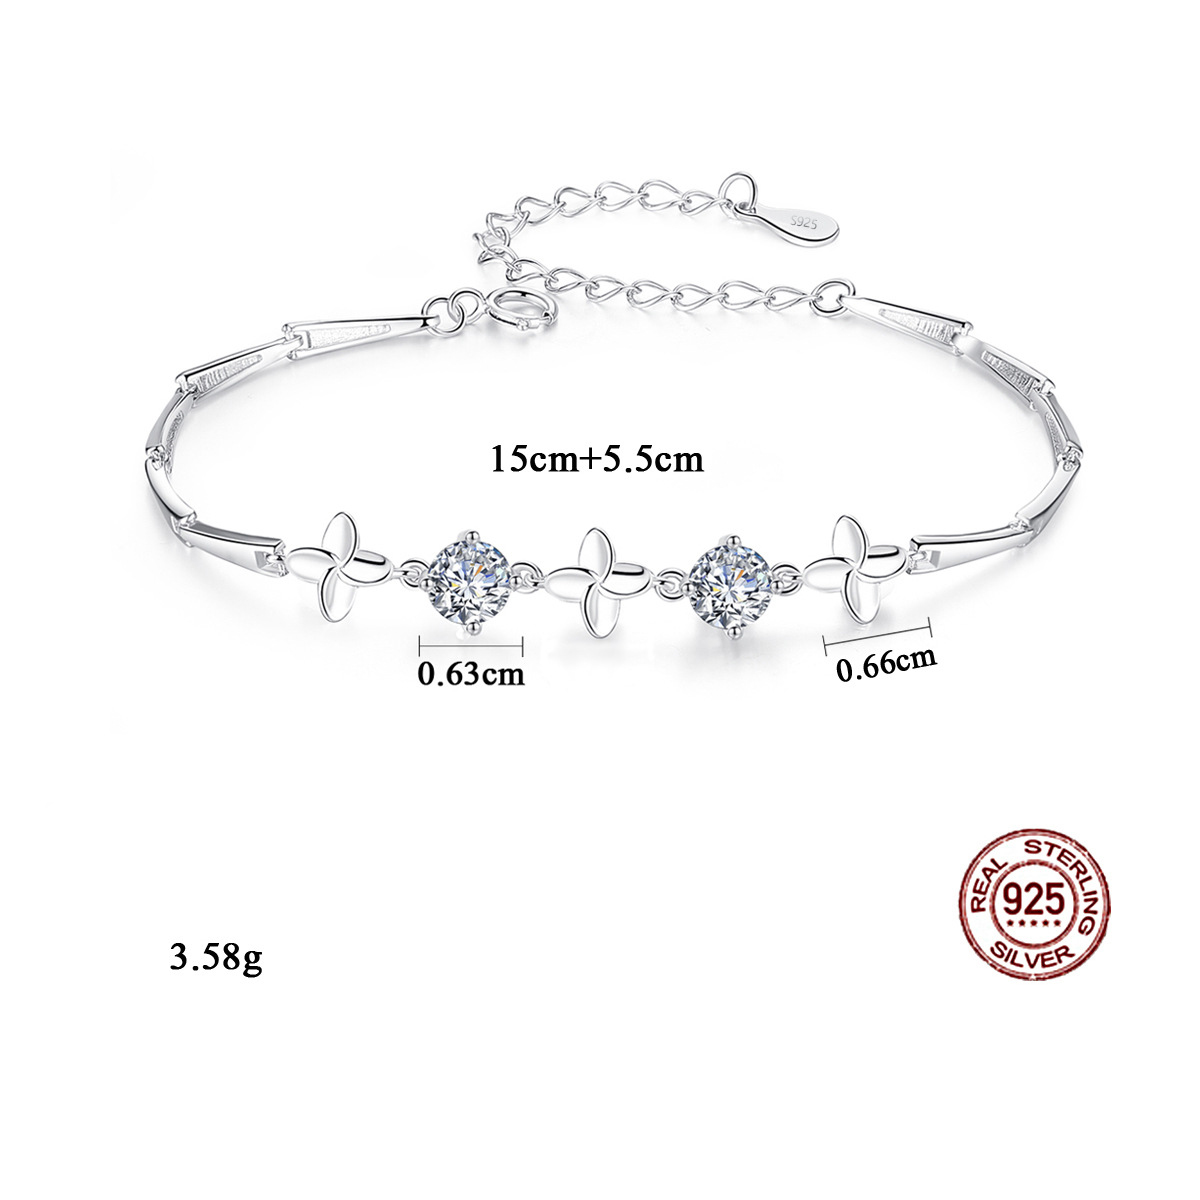 3a Cz Sterling Silver Four-Leaf Clover Bracelet - DABZ0005. Free Shipping,  Easy 30 Days Returns and Exchange, 6 Month Plating Warranty.